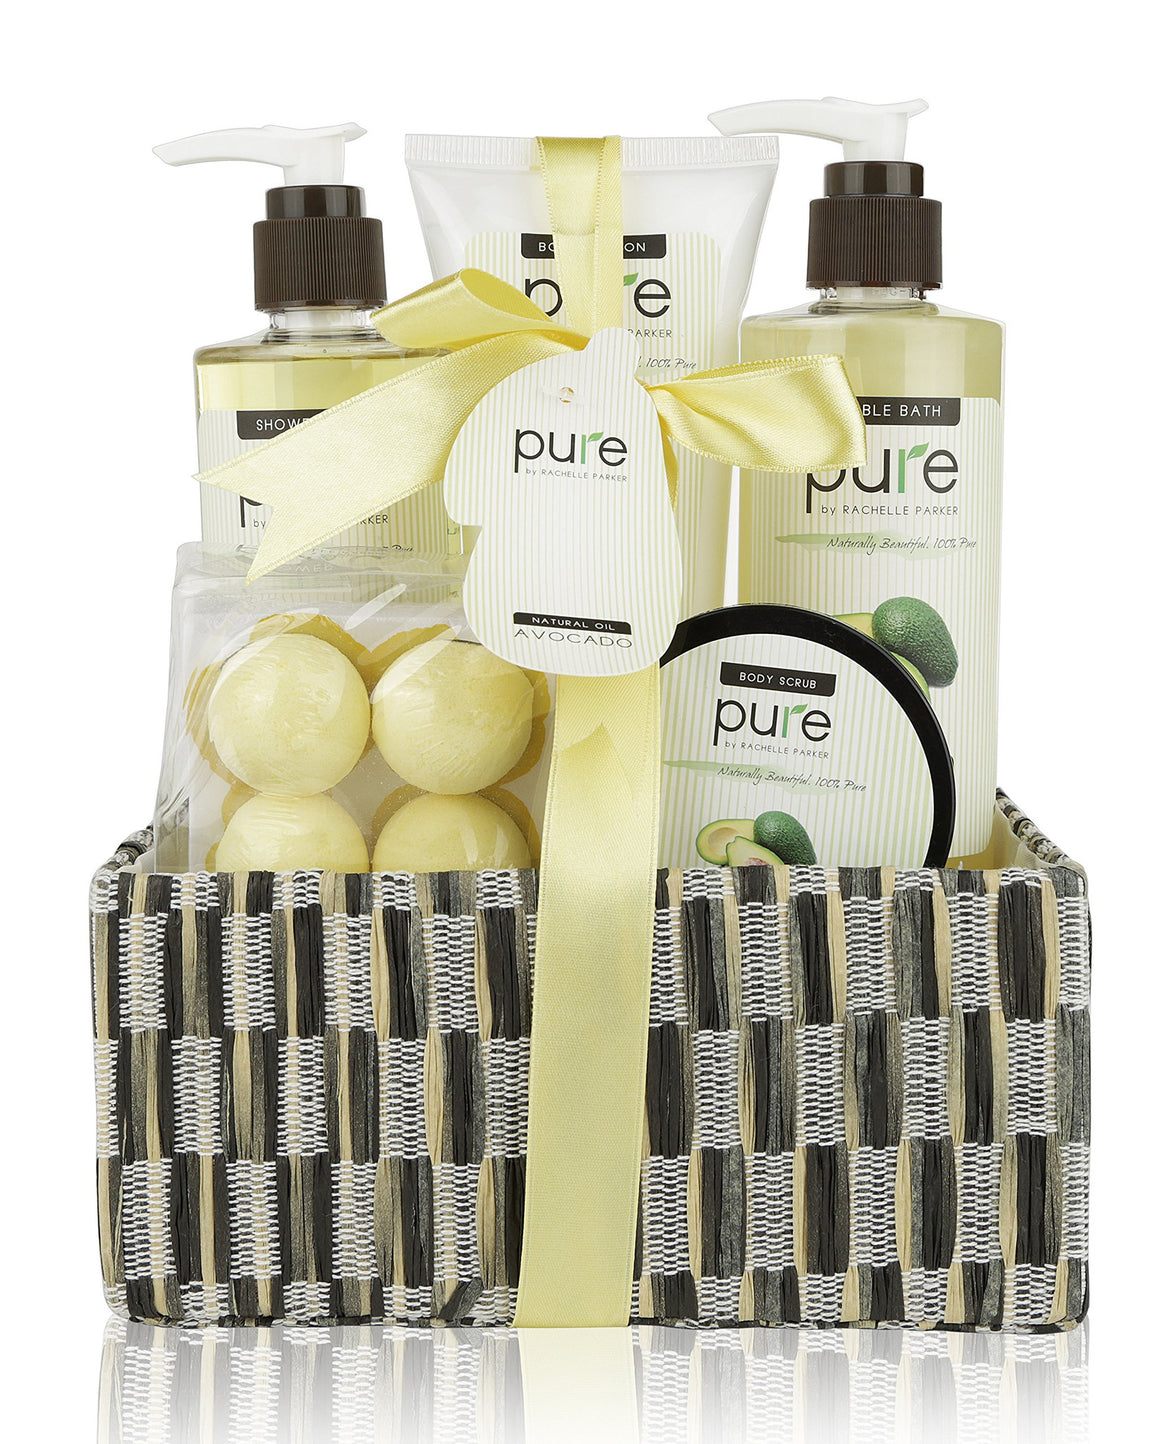 Deluxe Spa Gift Basket- Hydrating Avocoda Oil Skin Therapy Kit Luxury Gift - Wrapped And Ready to Deliver Results